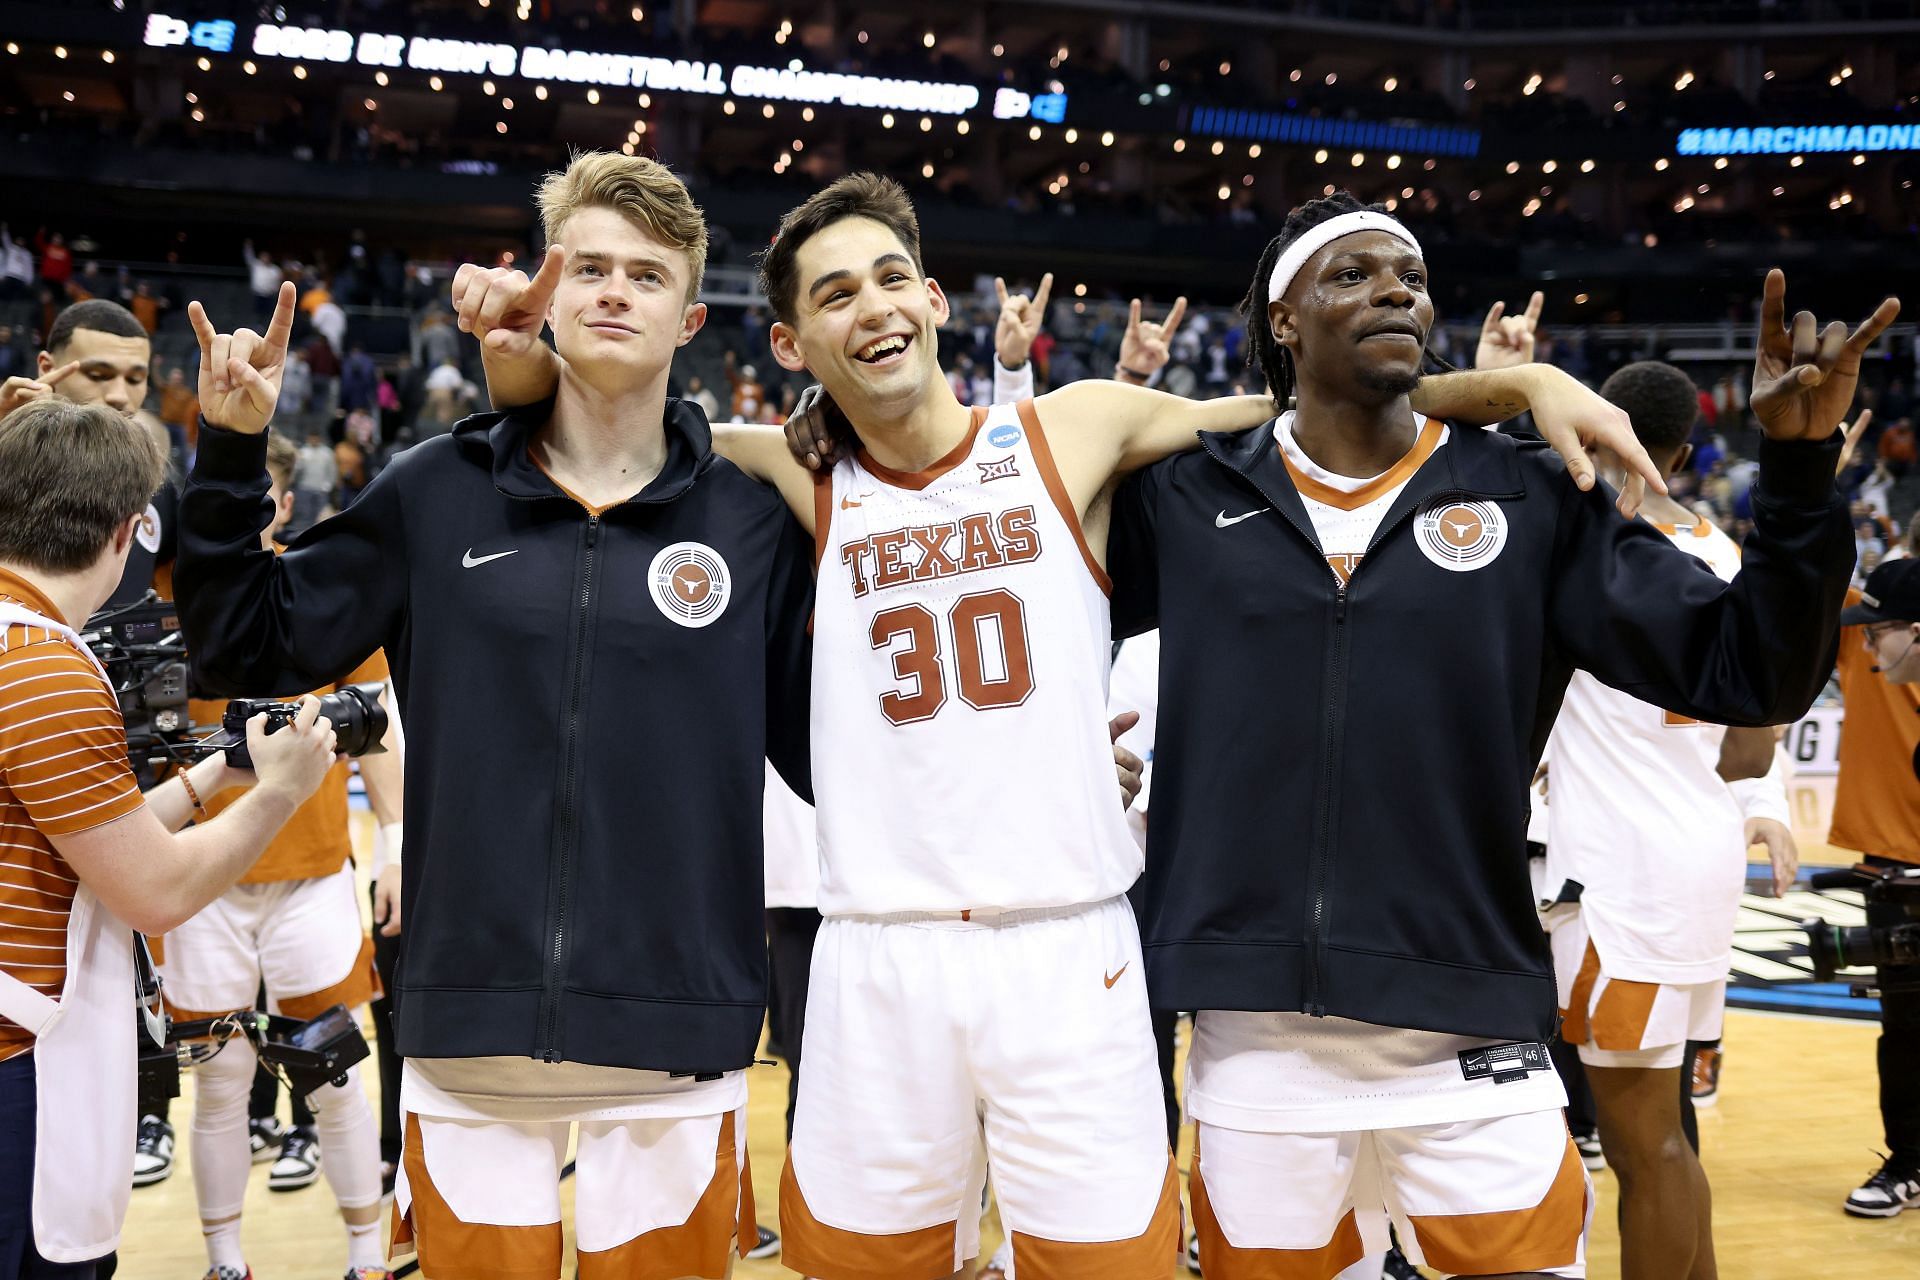 The Longhorns will try to advance to the Final Four for the first time in 20 years (Image via Getty Images)